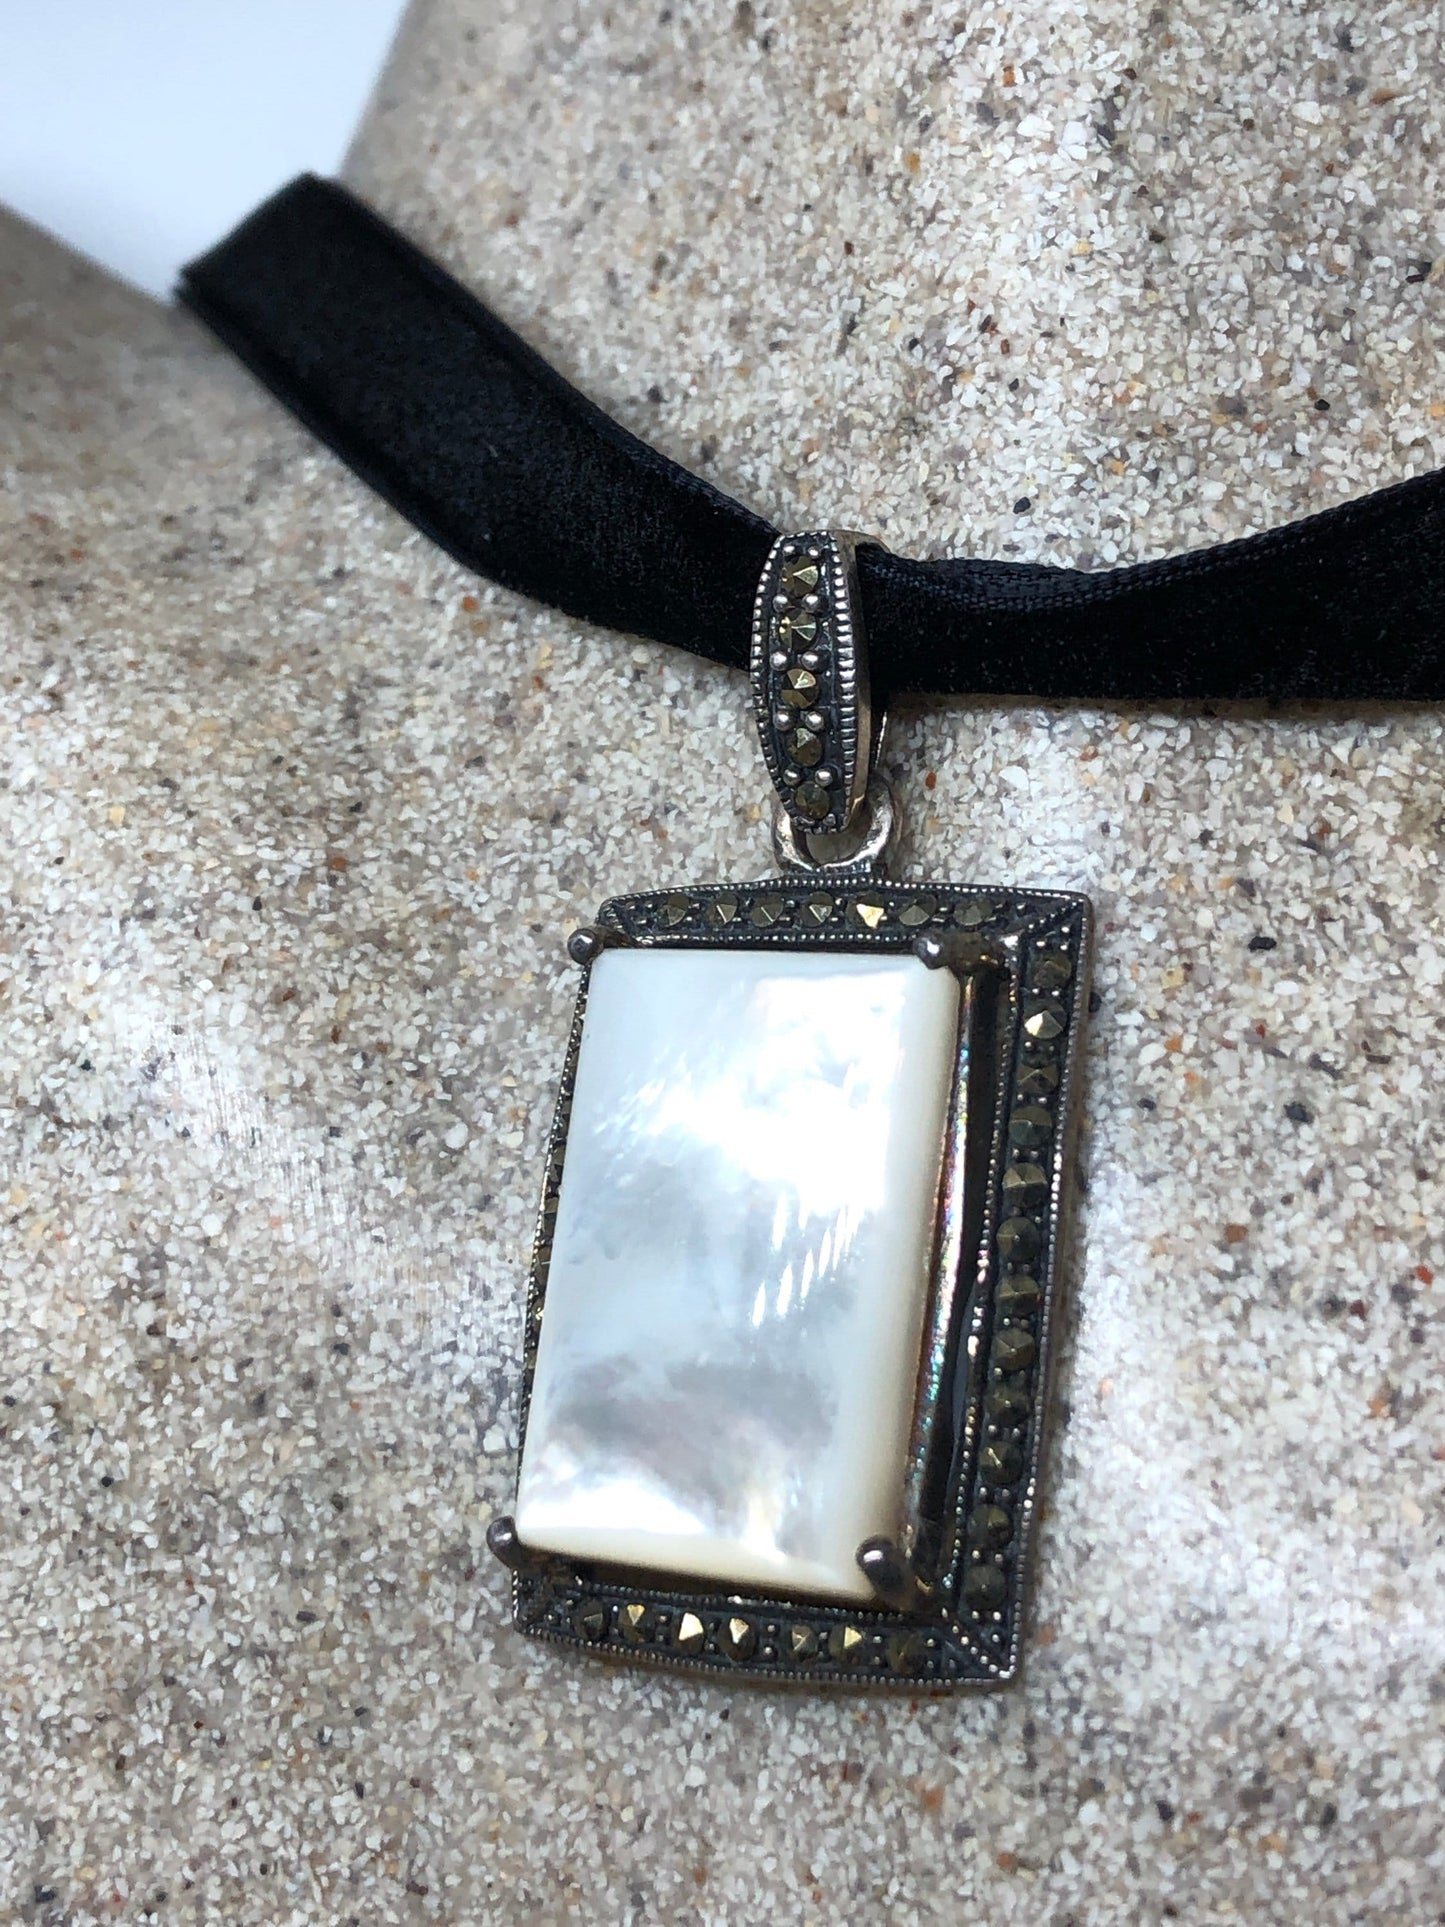 Vintage Deco Marcasite 925 Sterling Silver Mother of Pearl Deco Pendant Necklace